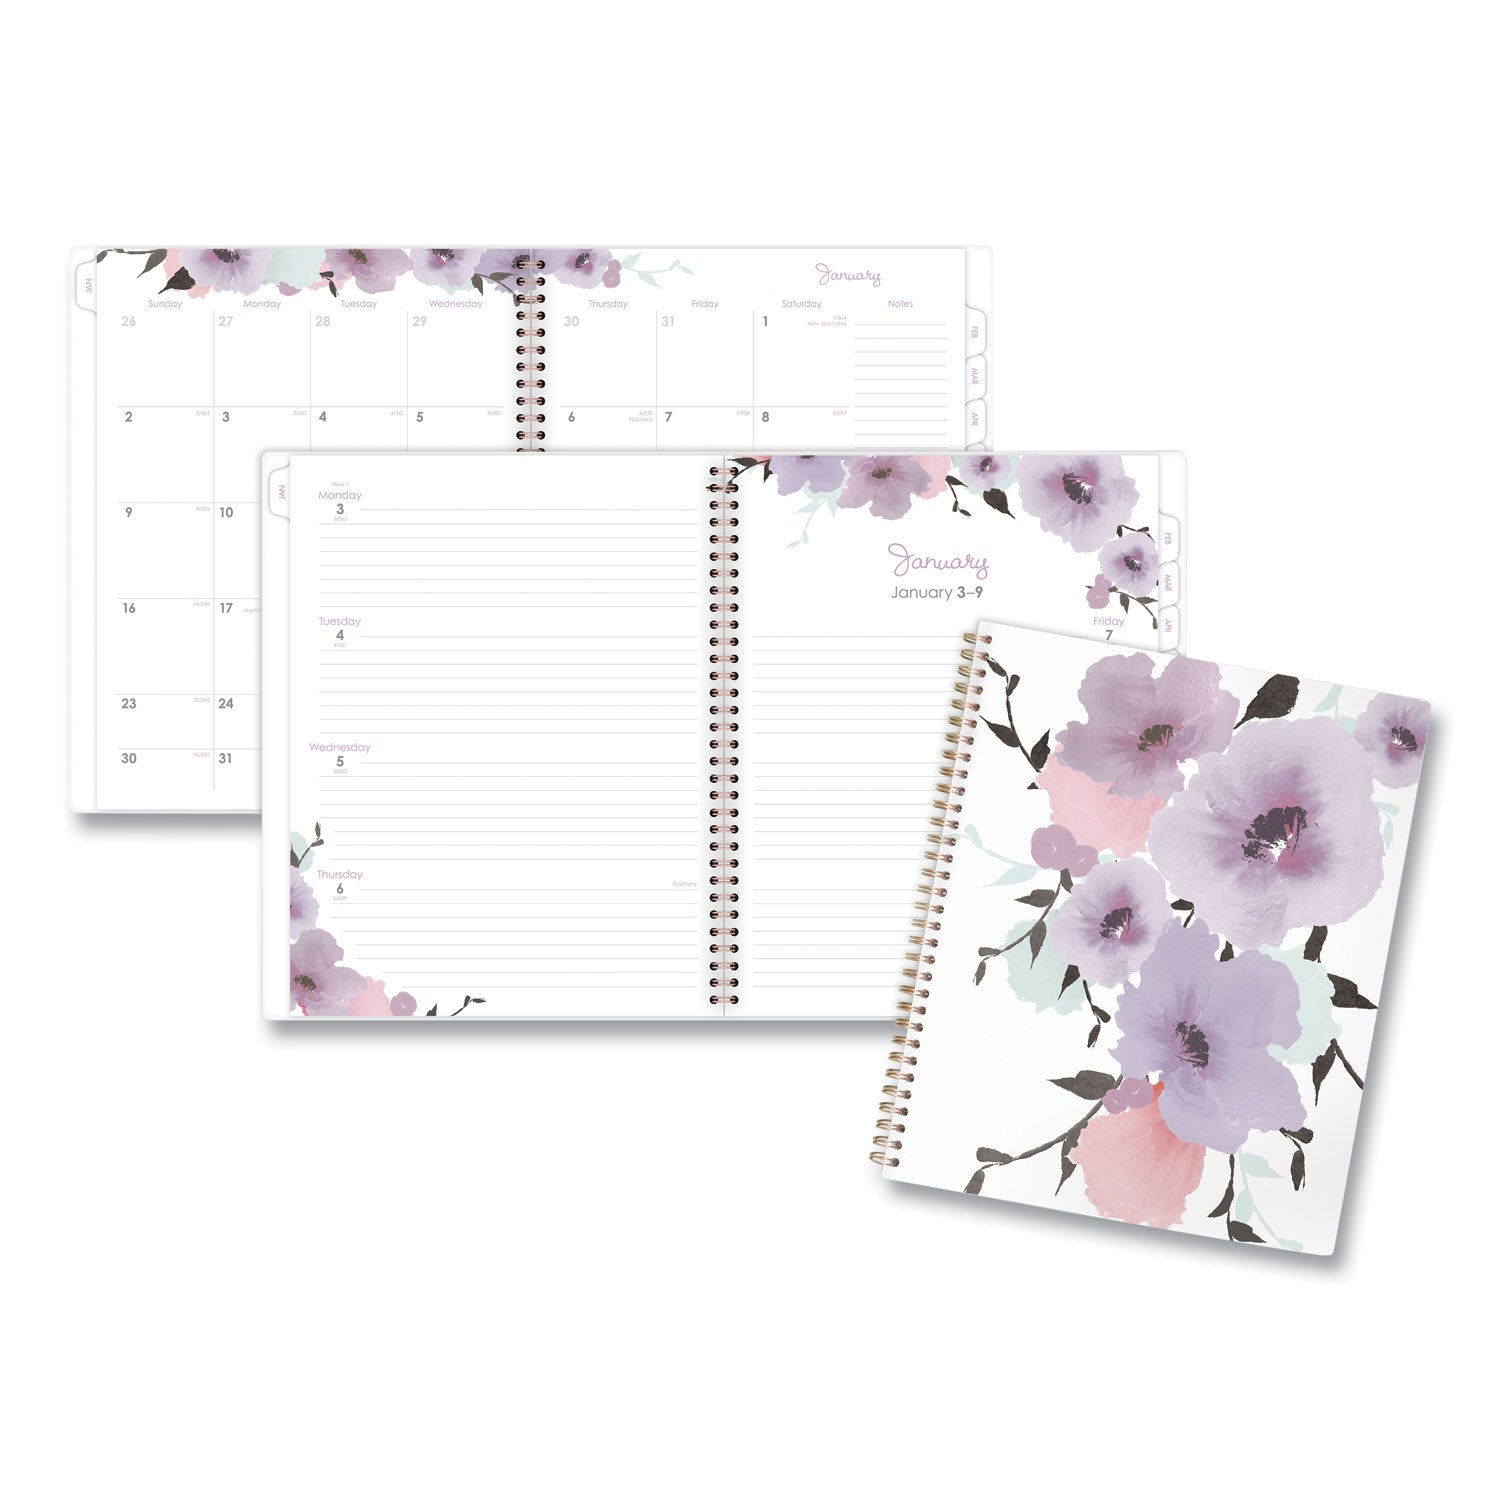 mina-weekly-monthly-planner-main-floral-artwork-11-x-85-white-violet-peach-cover-12-month-jan-to-dec-2024_aag1134905 - 1